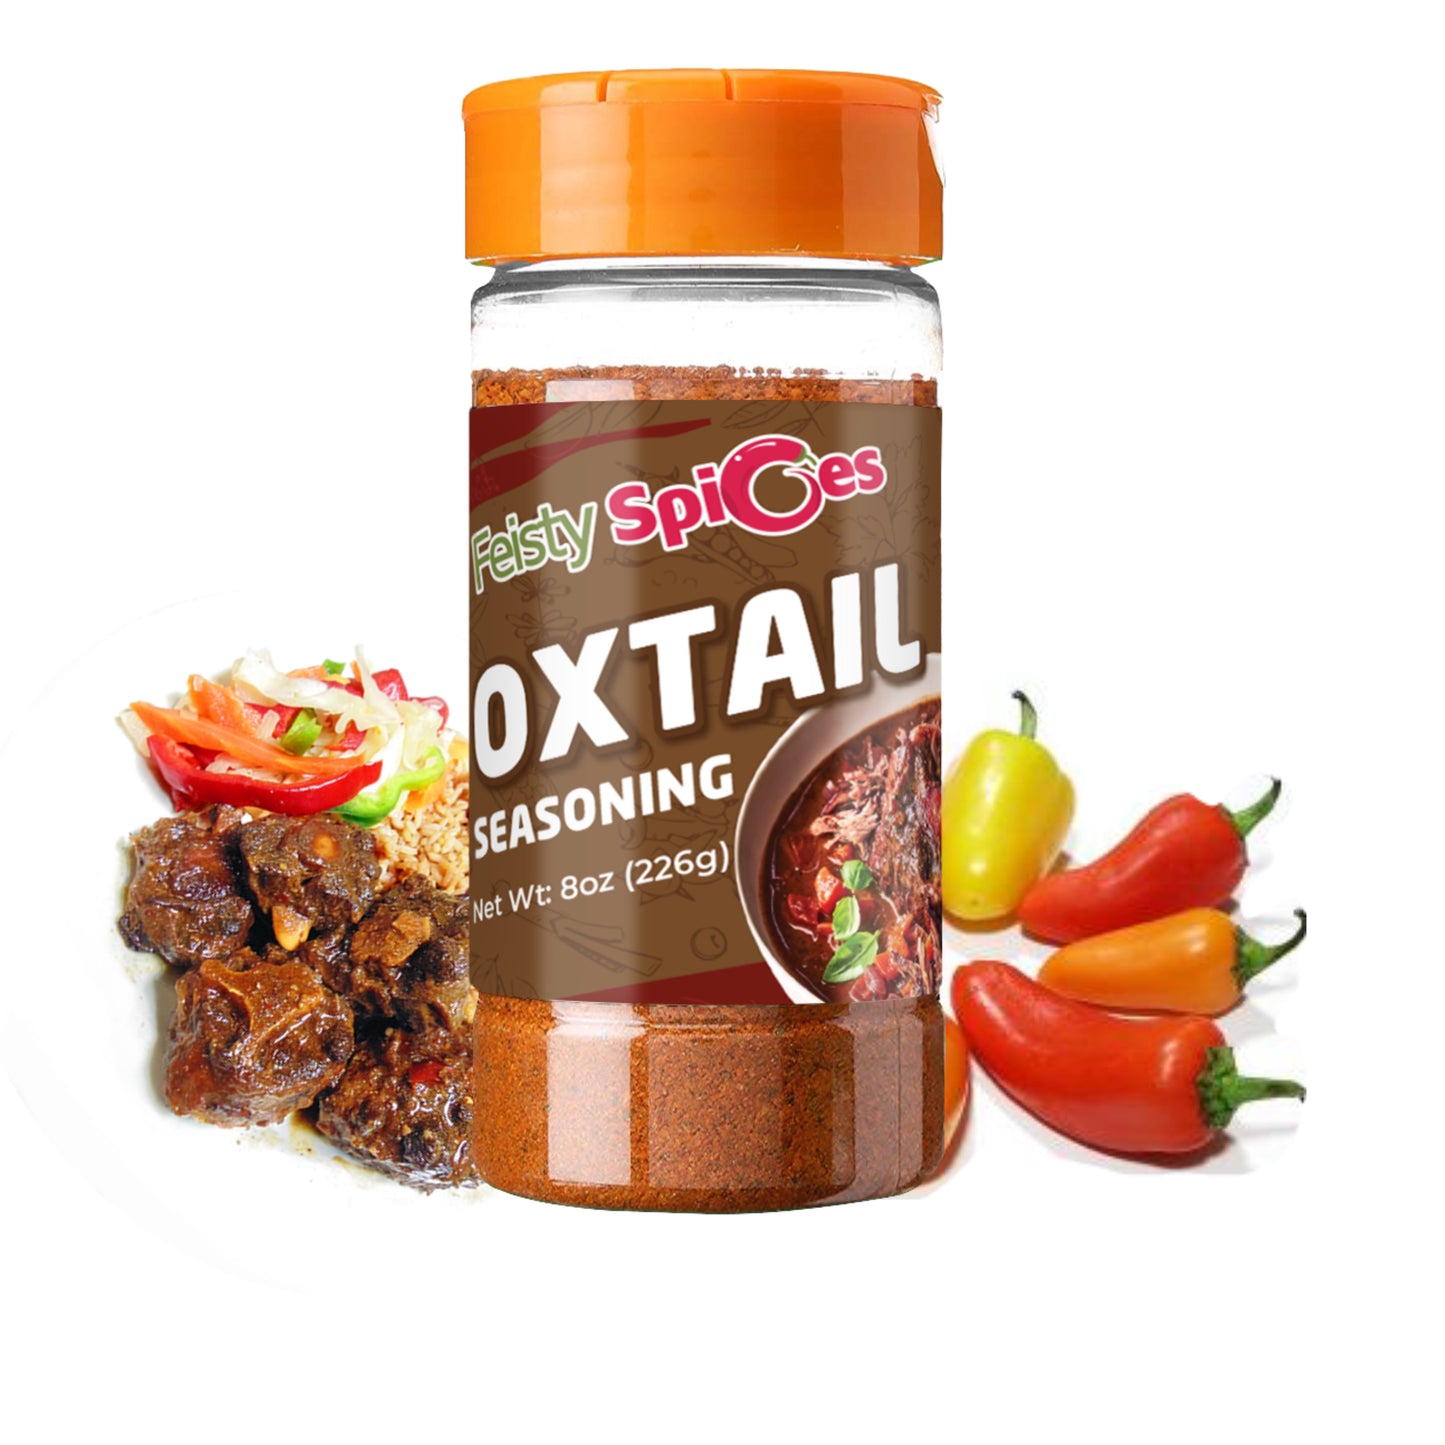 Feisty Spices Caribbean Oxtail Seasoning - 8oz Bottle | Authentic Caribbean Masterpiece | Low Sodium | Unforgettable Flavor Explosion